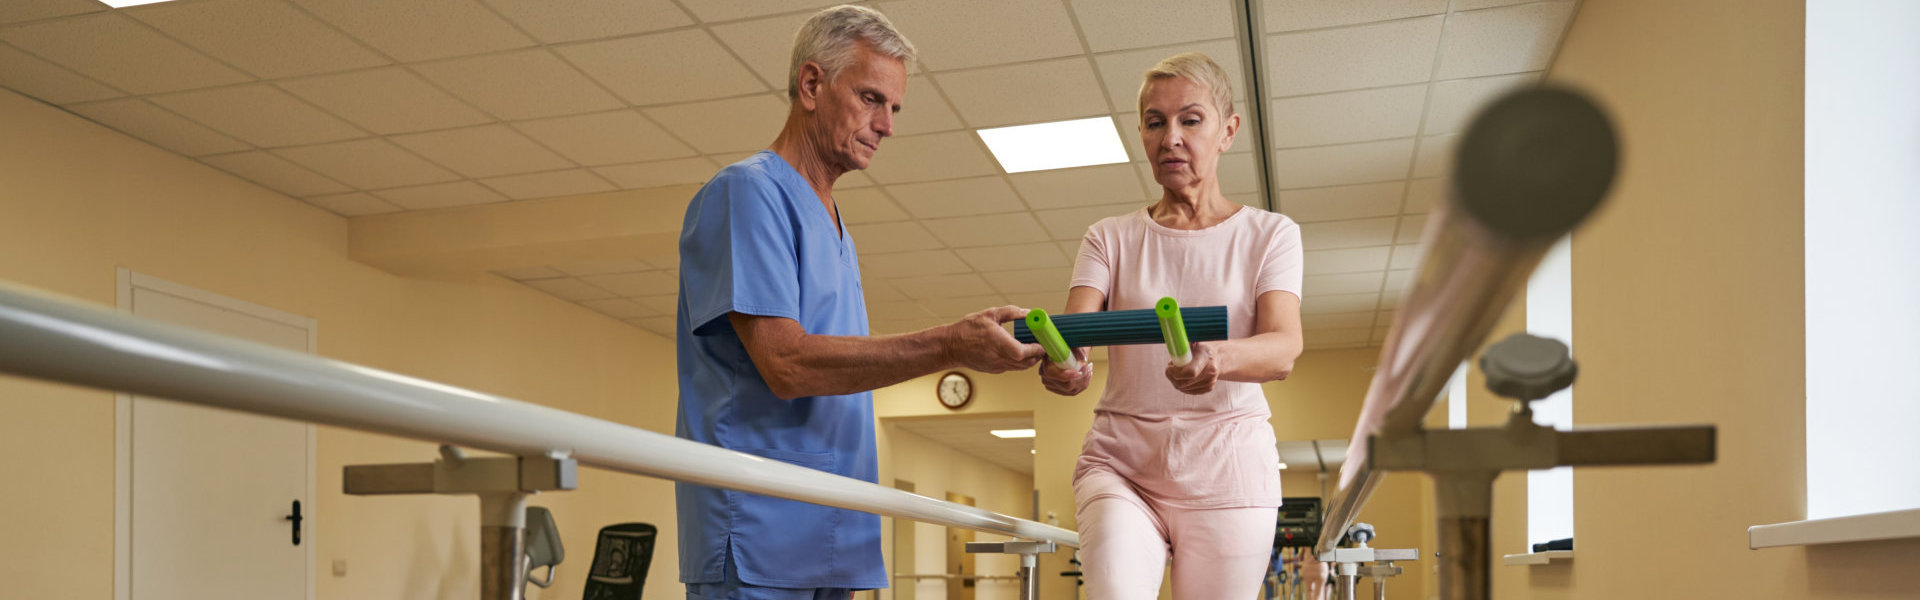 staff helping patient for balance exercising